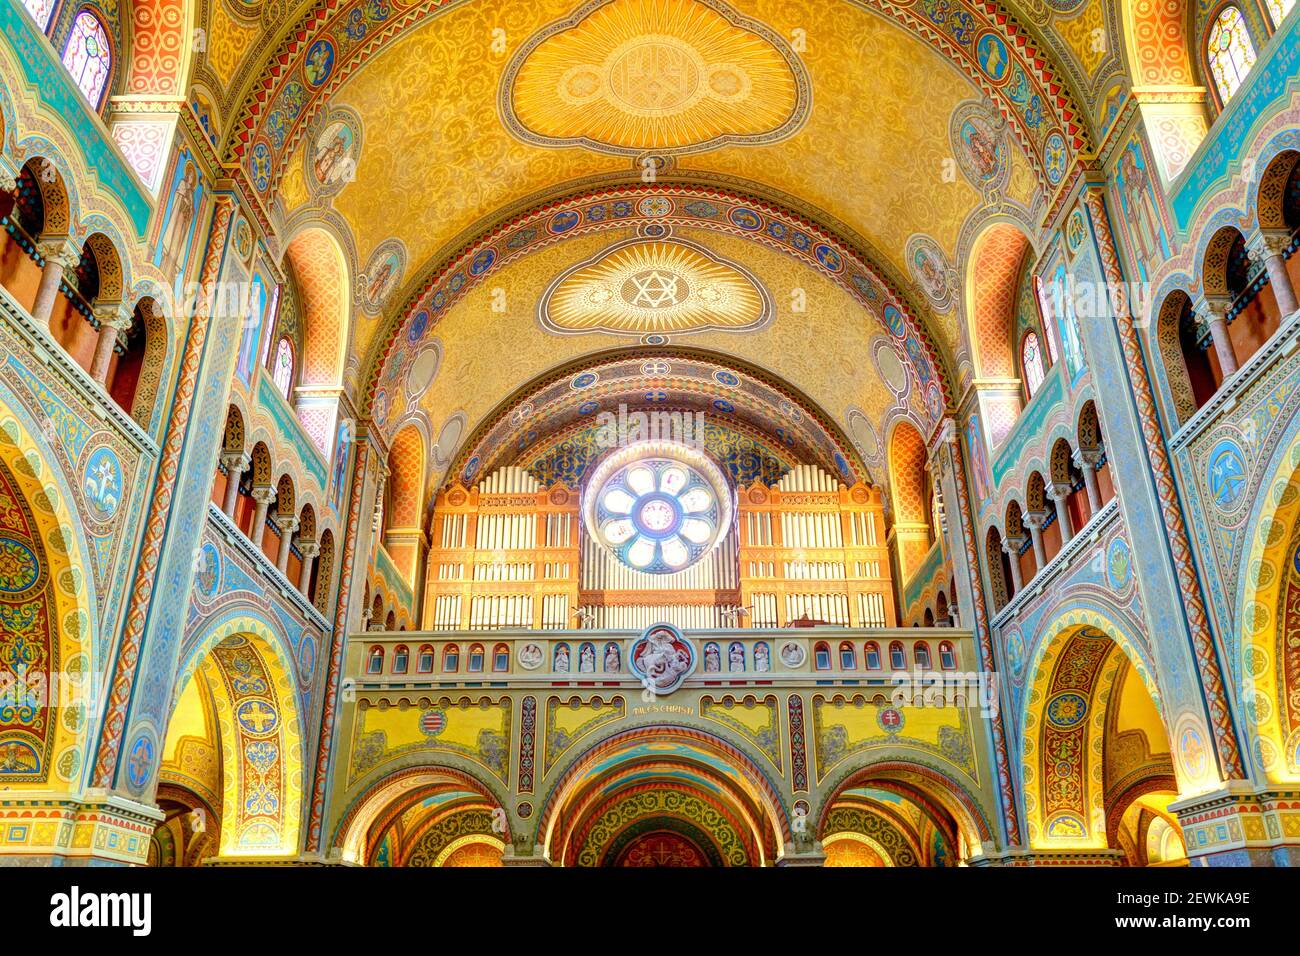 Interior of the Szeged Cathedral, HDR Image Stock Photo